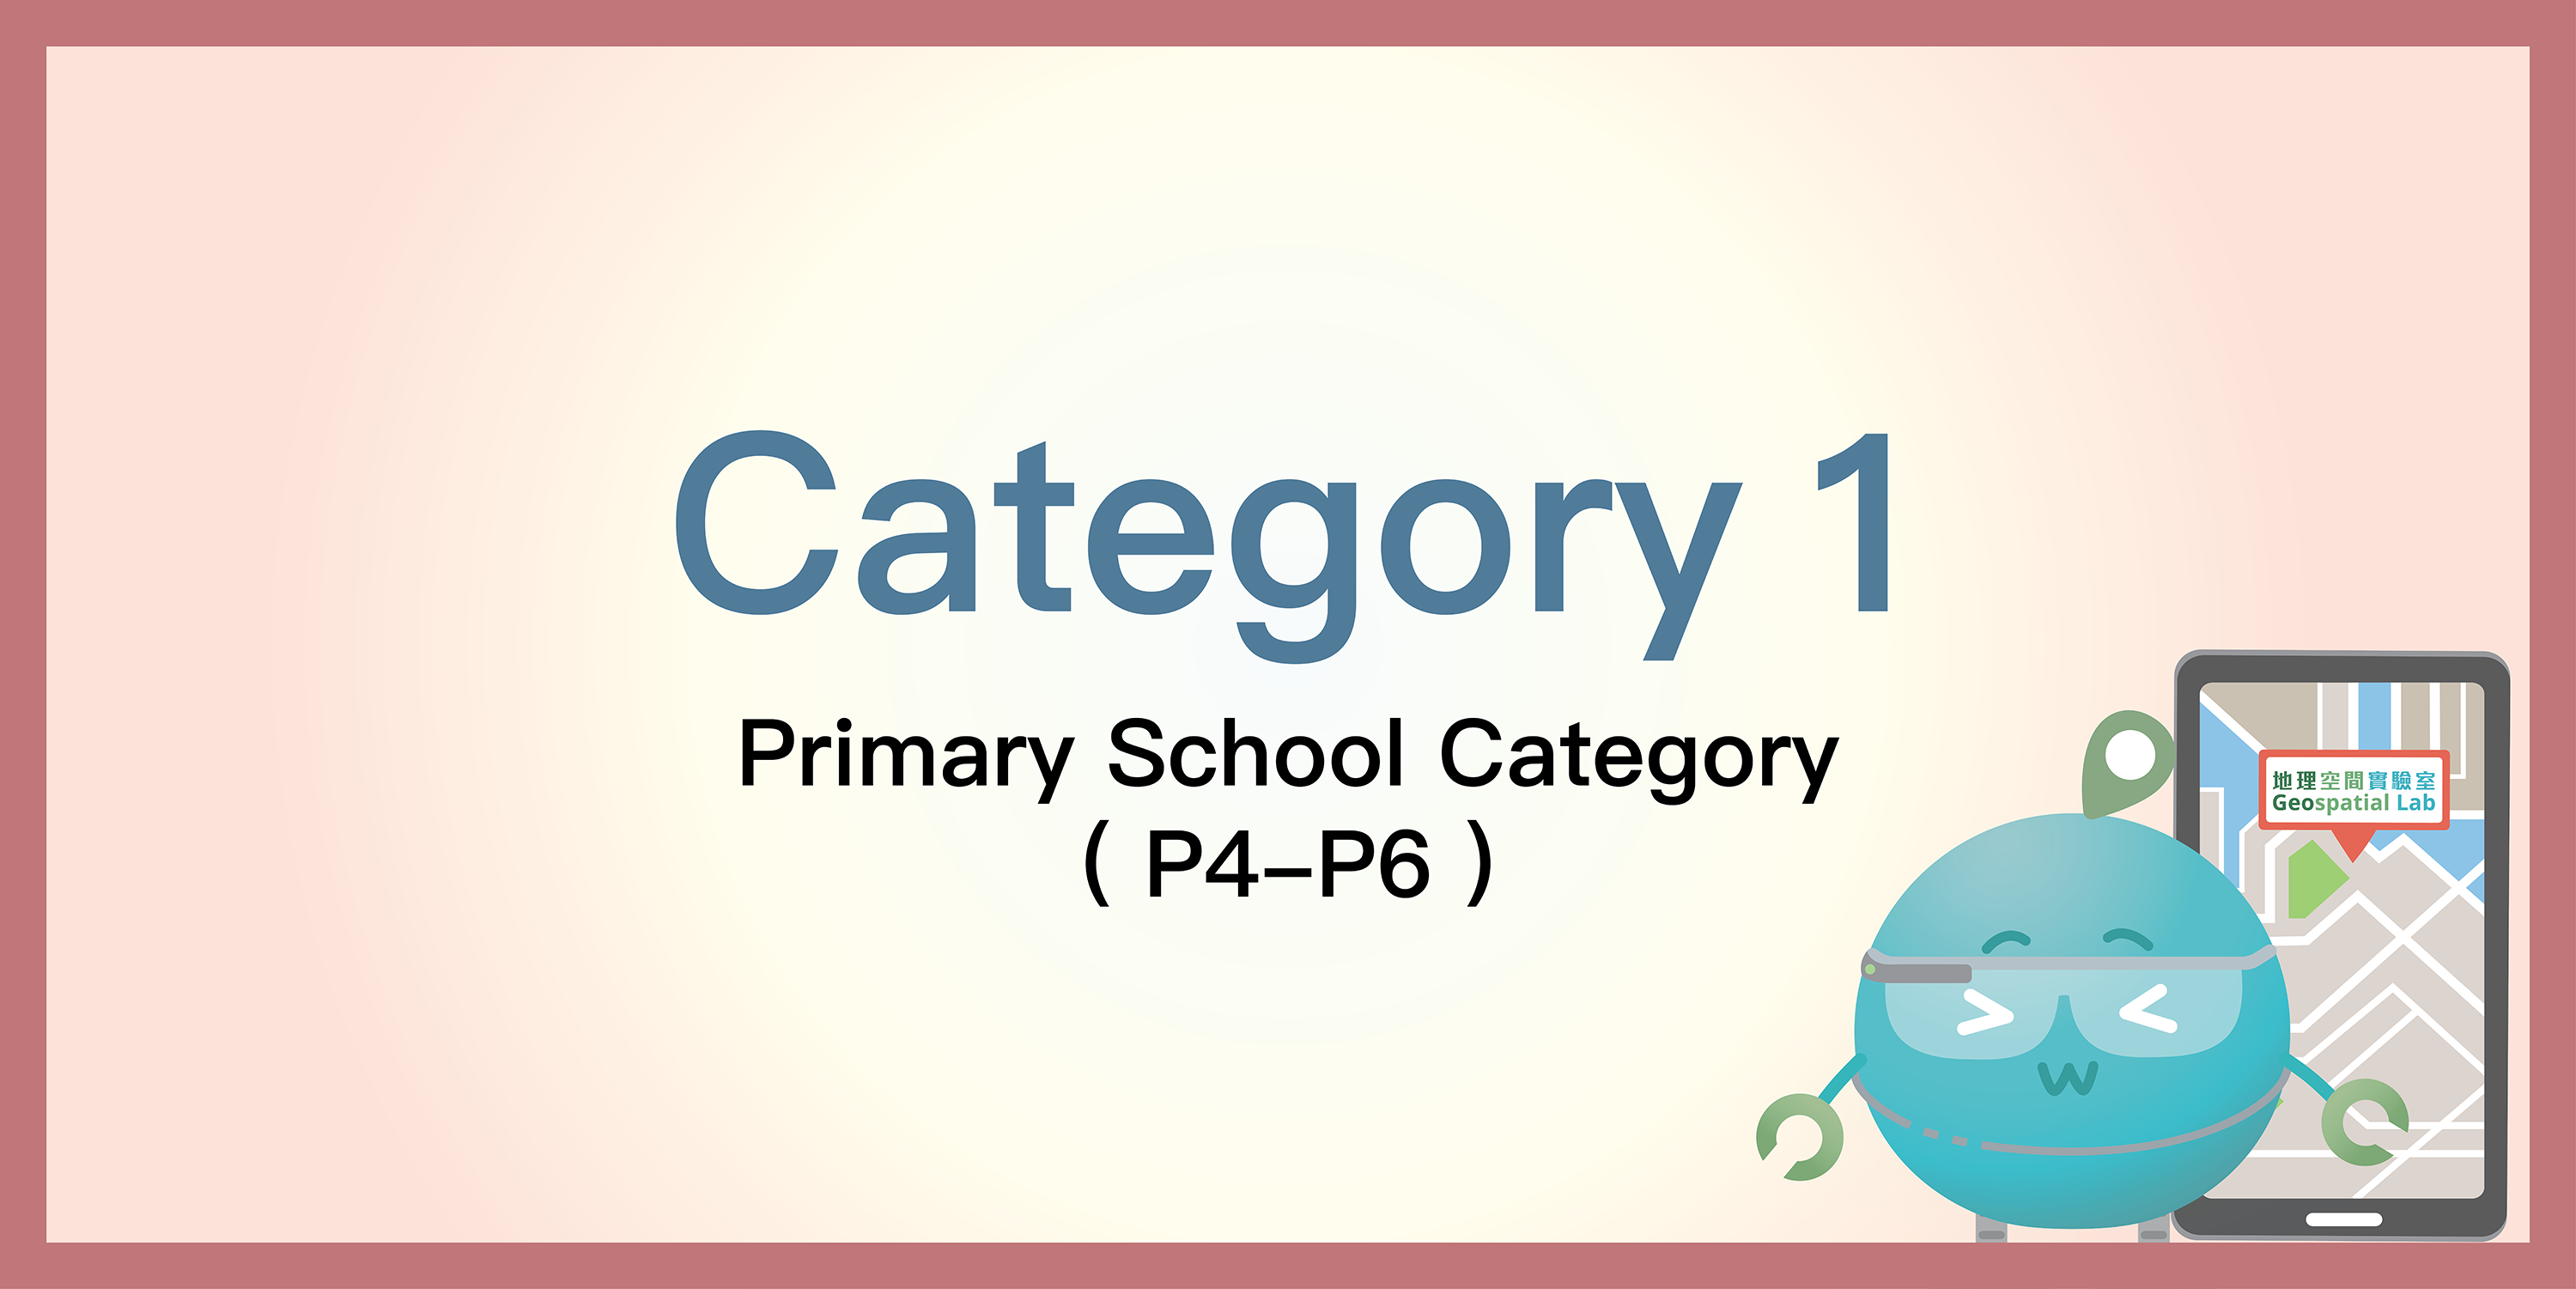 Category 1: Primary School Category (P4 to P6)